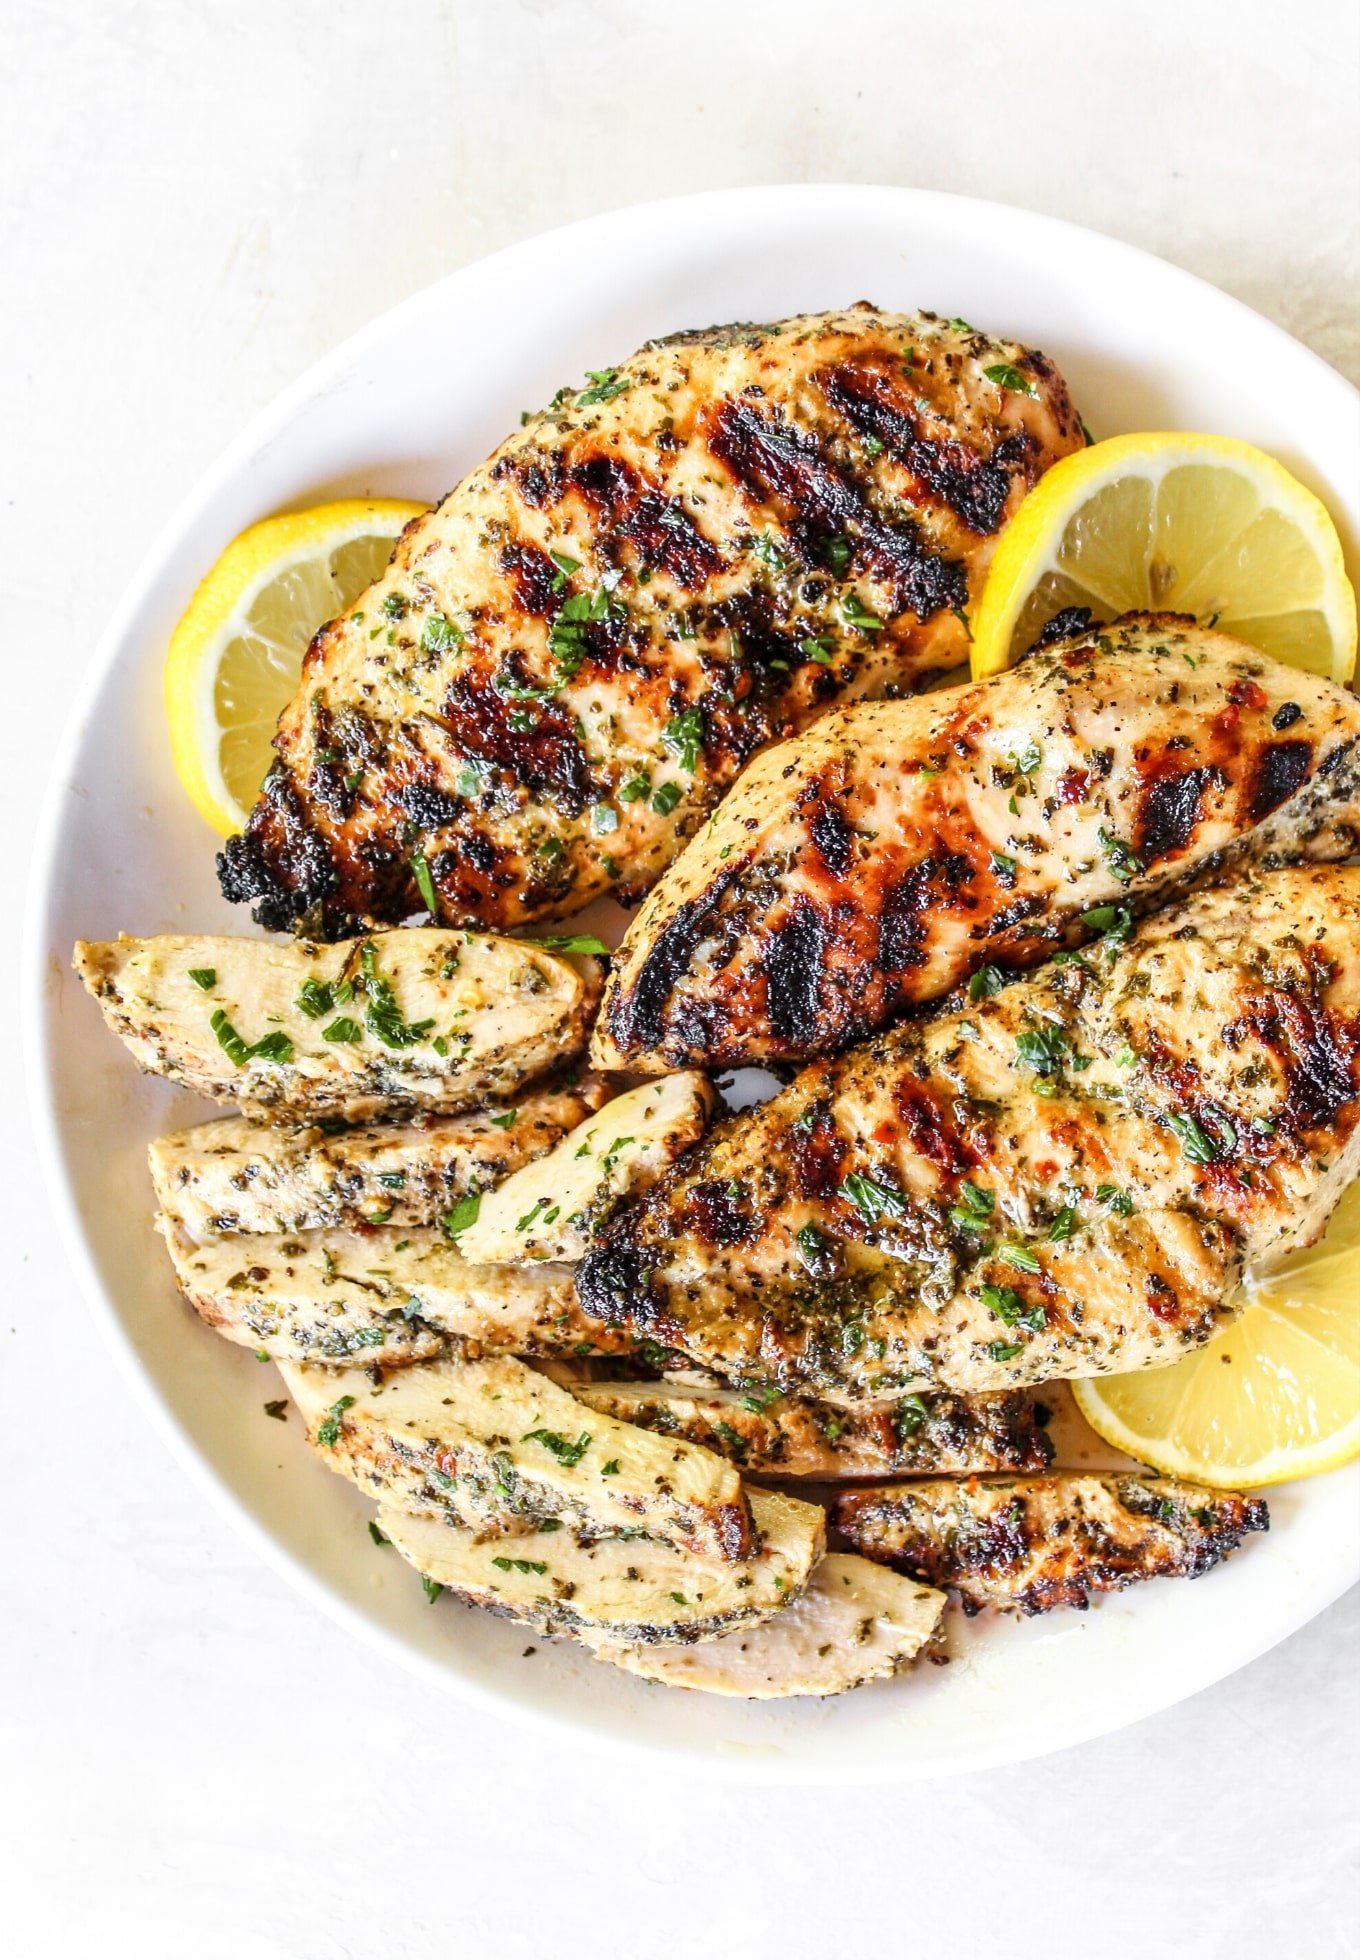 Lemon-Herb-Grilled-Chicken-by-The-Whole-Cook-vertical - The Whole Cook